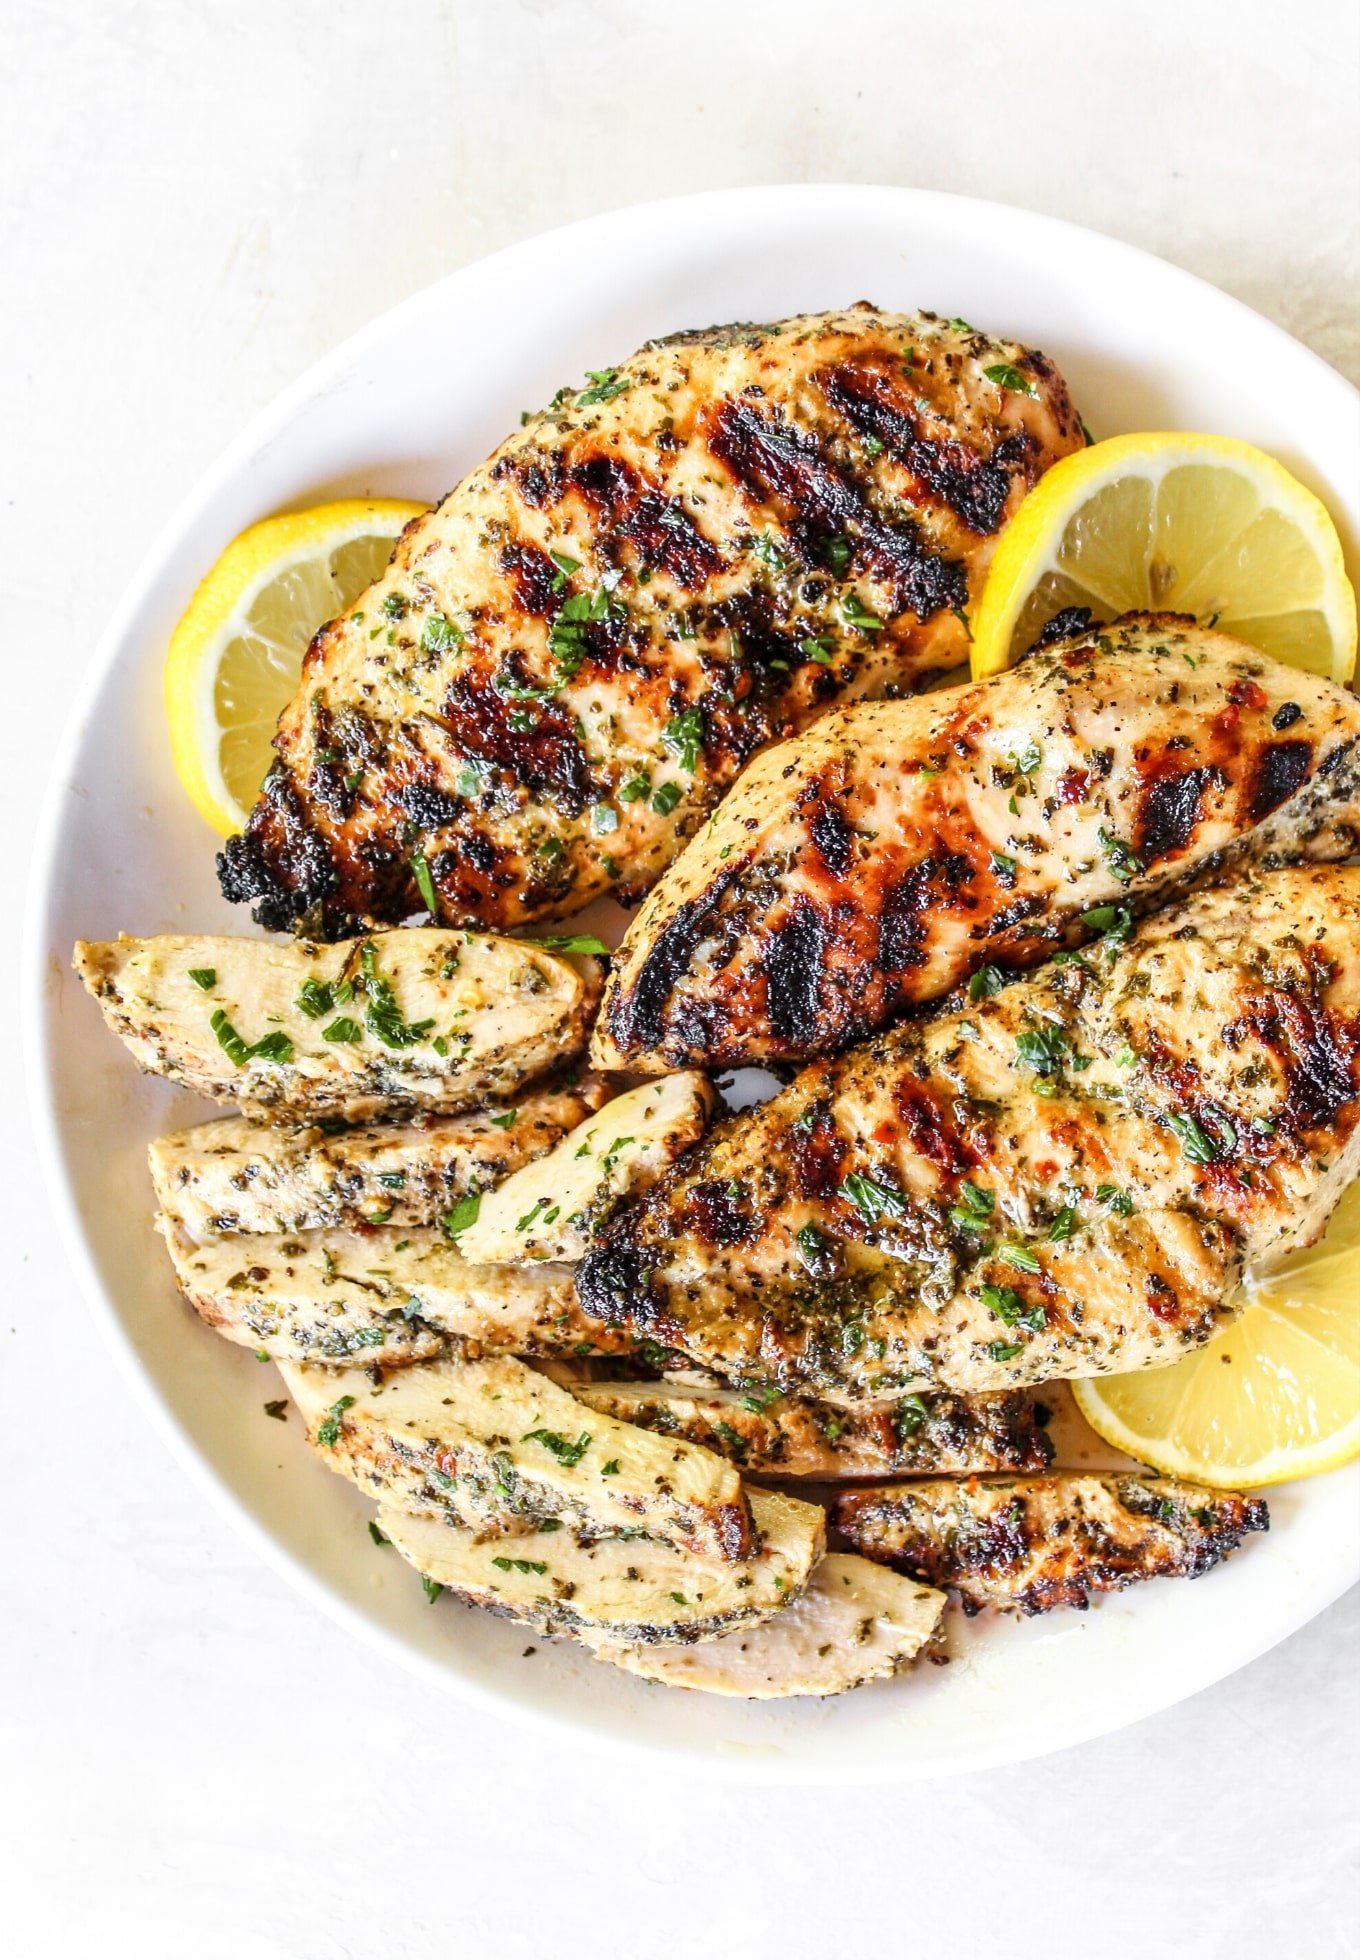 Lemon-Herb-Grilled-Chicken-by-The-Whole-Cook-vertical - The Whole Cook